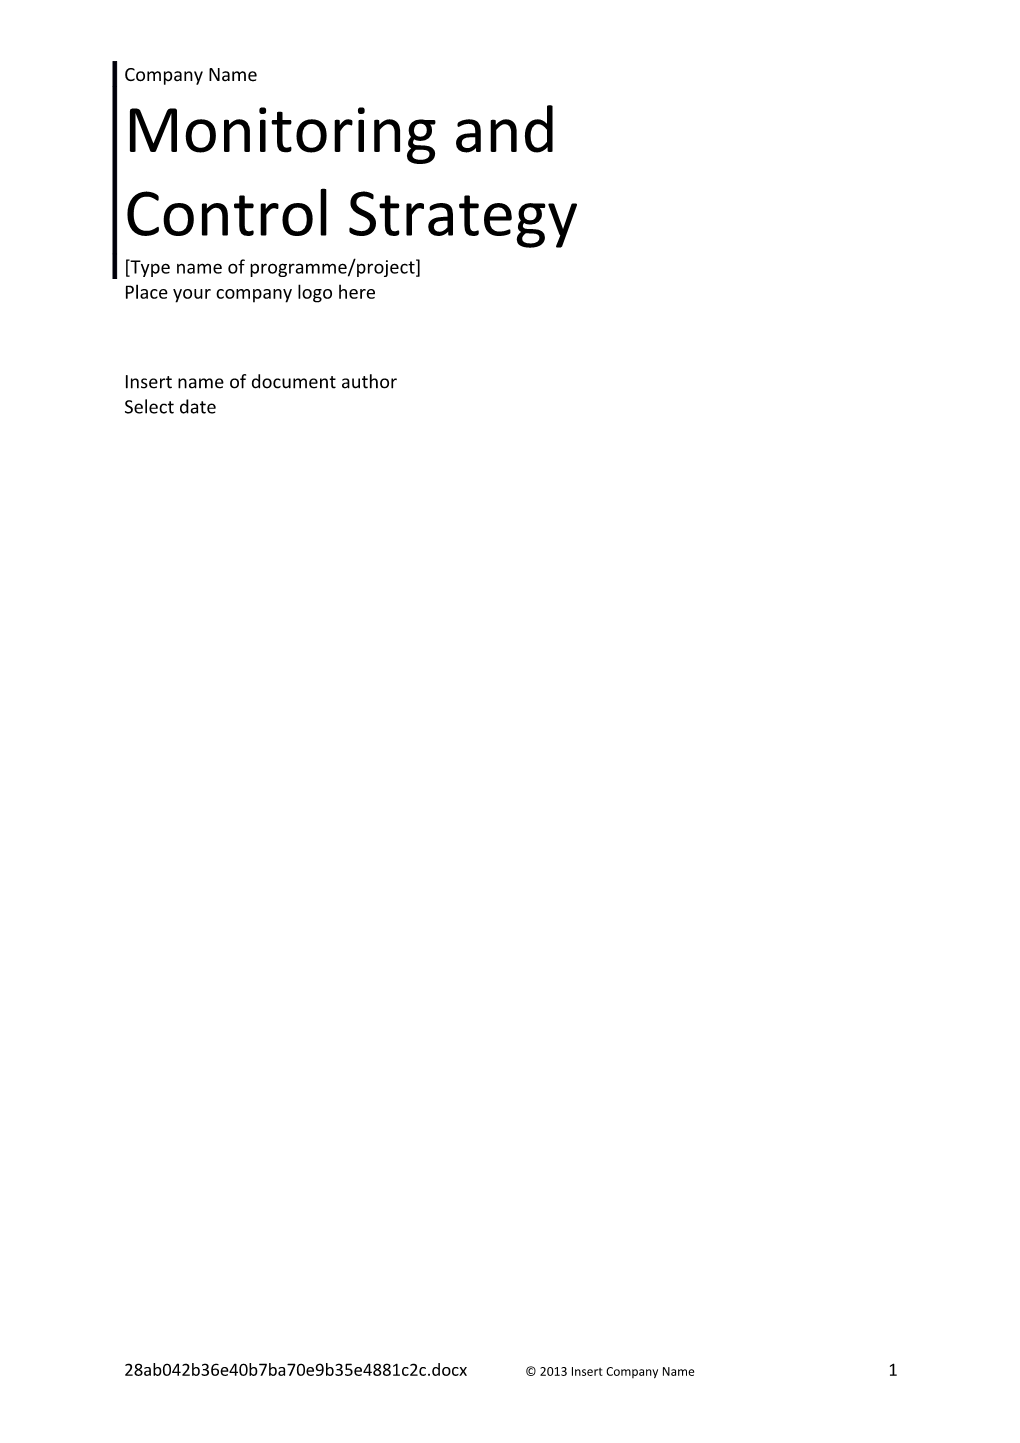 Monitoring and Control Strategy